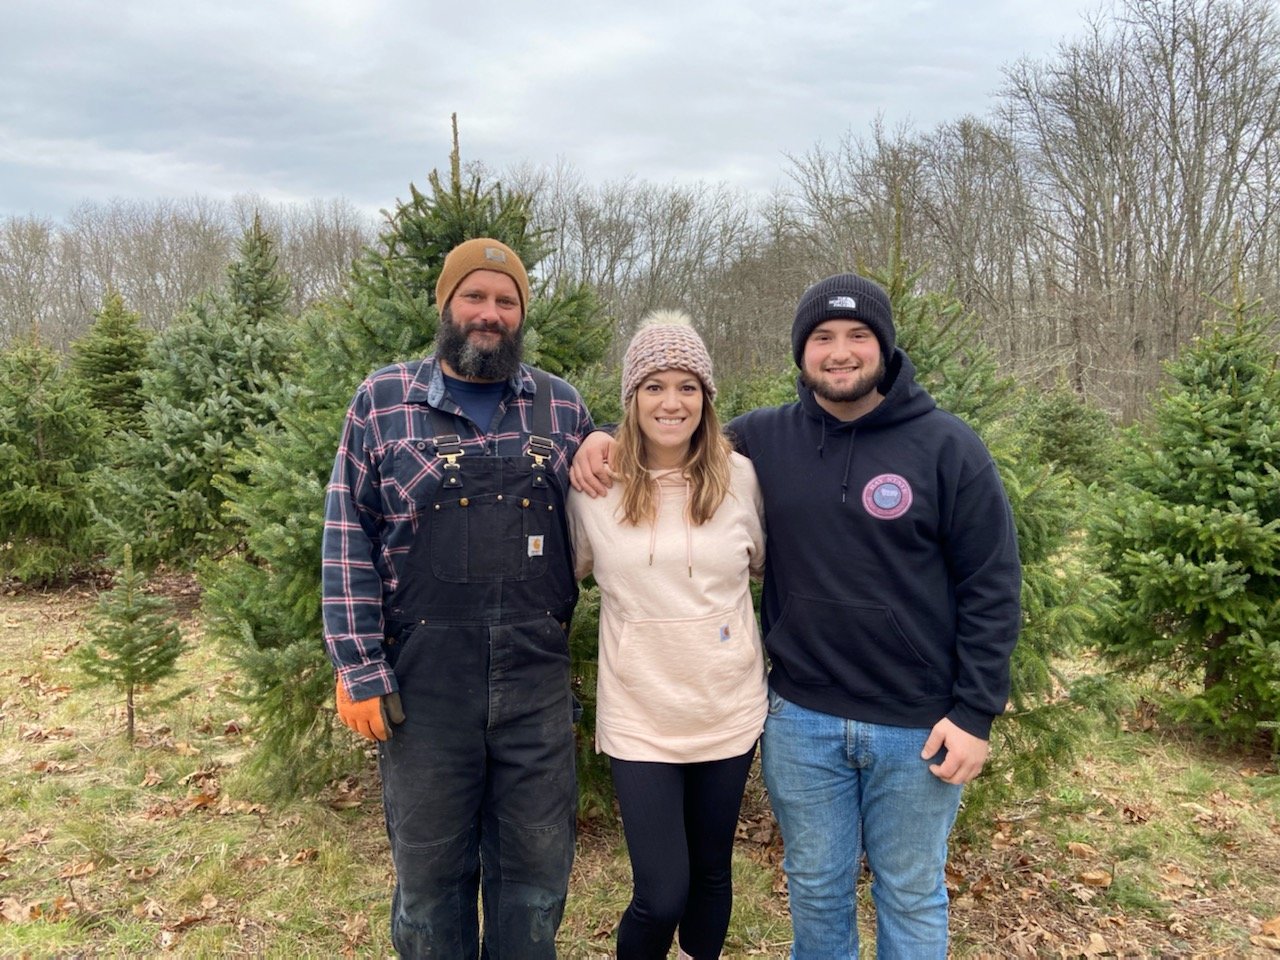 Their first season as tree farmers exceeded all expectations. The Perrys (from left) Lou, Marta and Travis, sold enough in the farm's first five days open to close for the season.